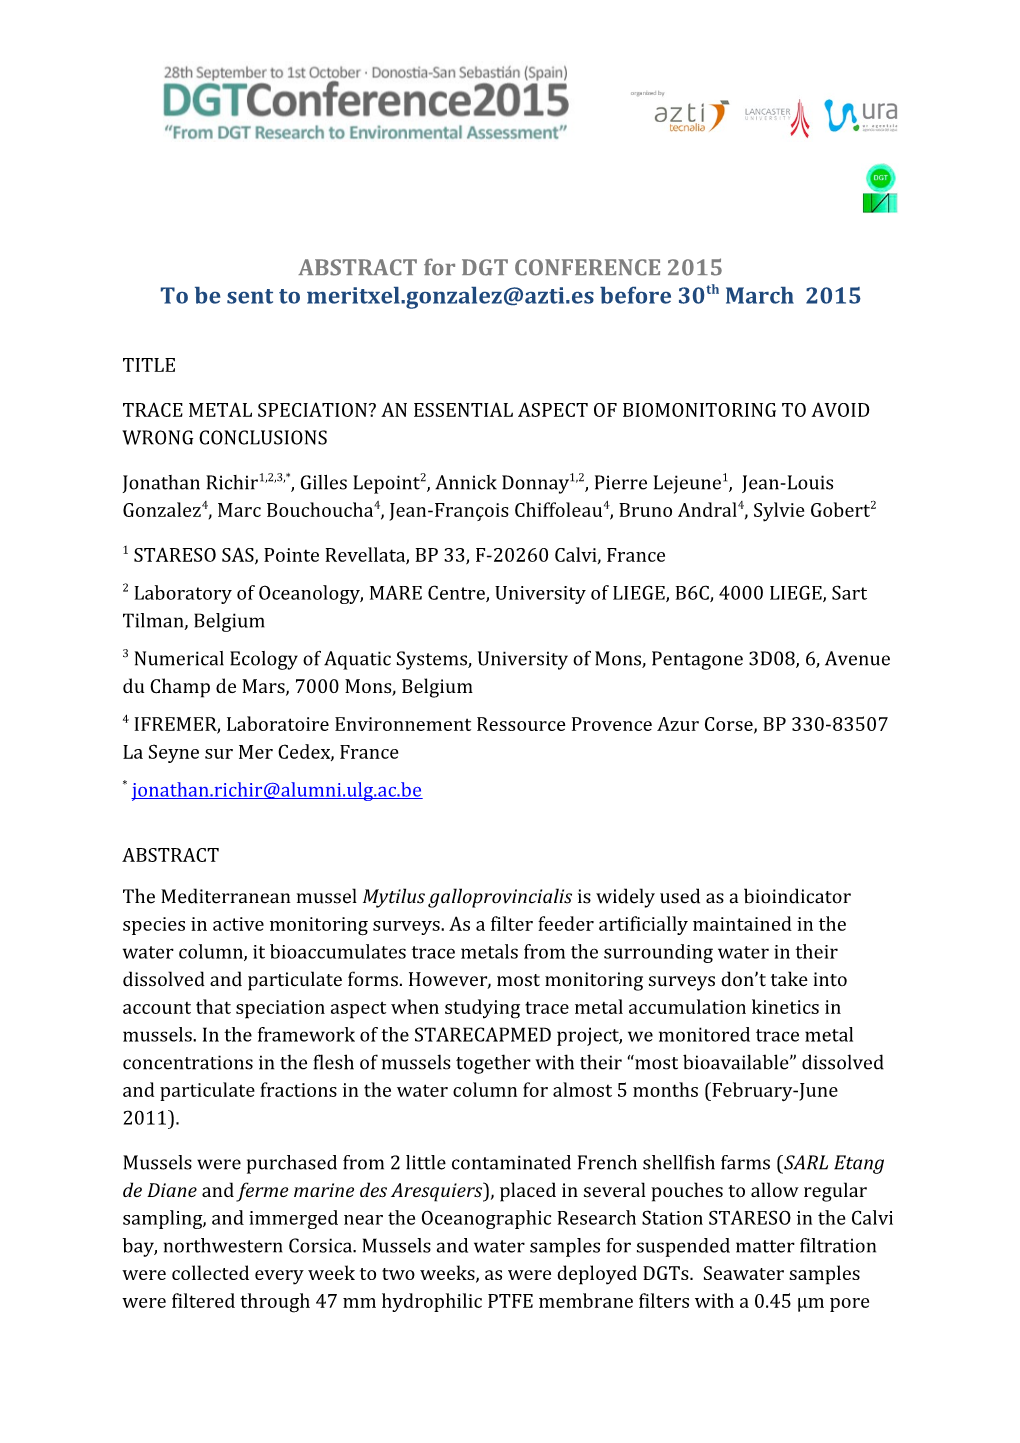 ABSTRACT for DGT CONFERENCE 2015